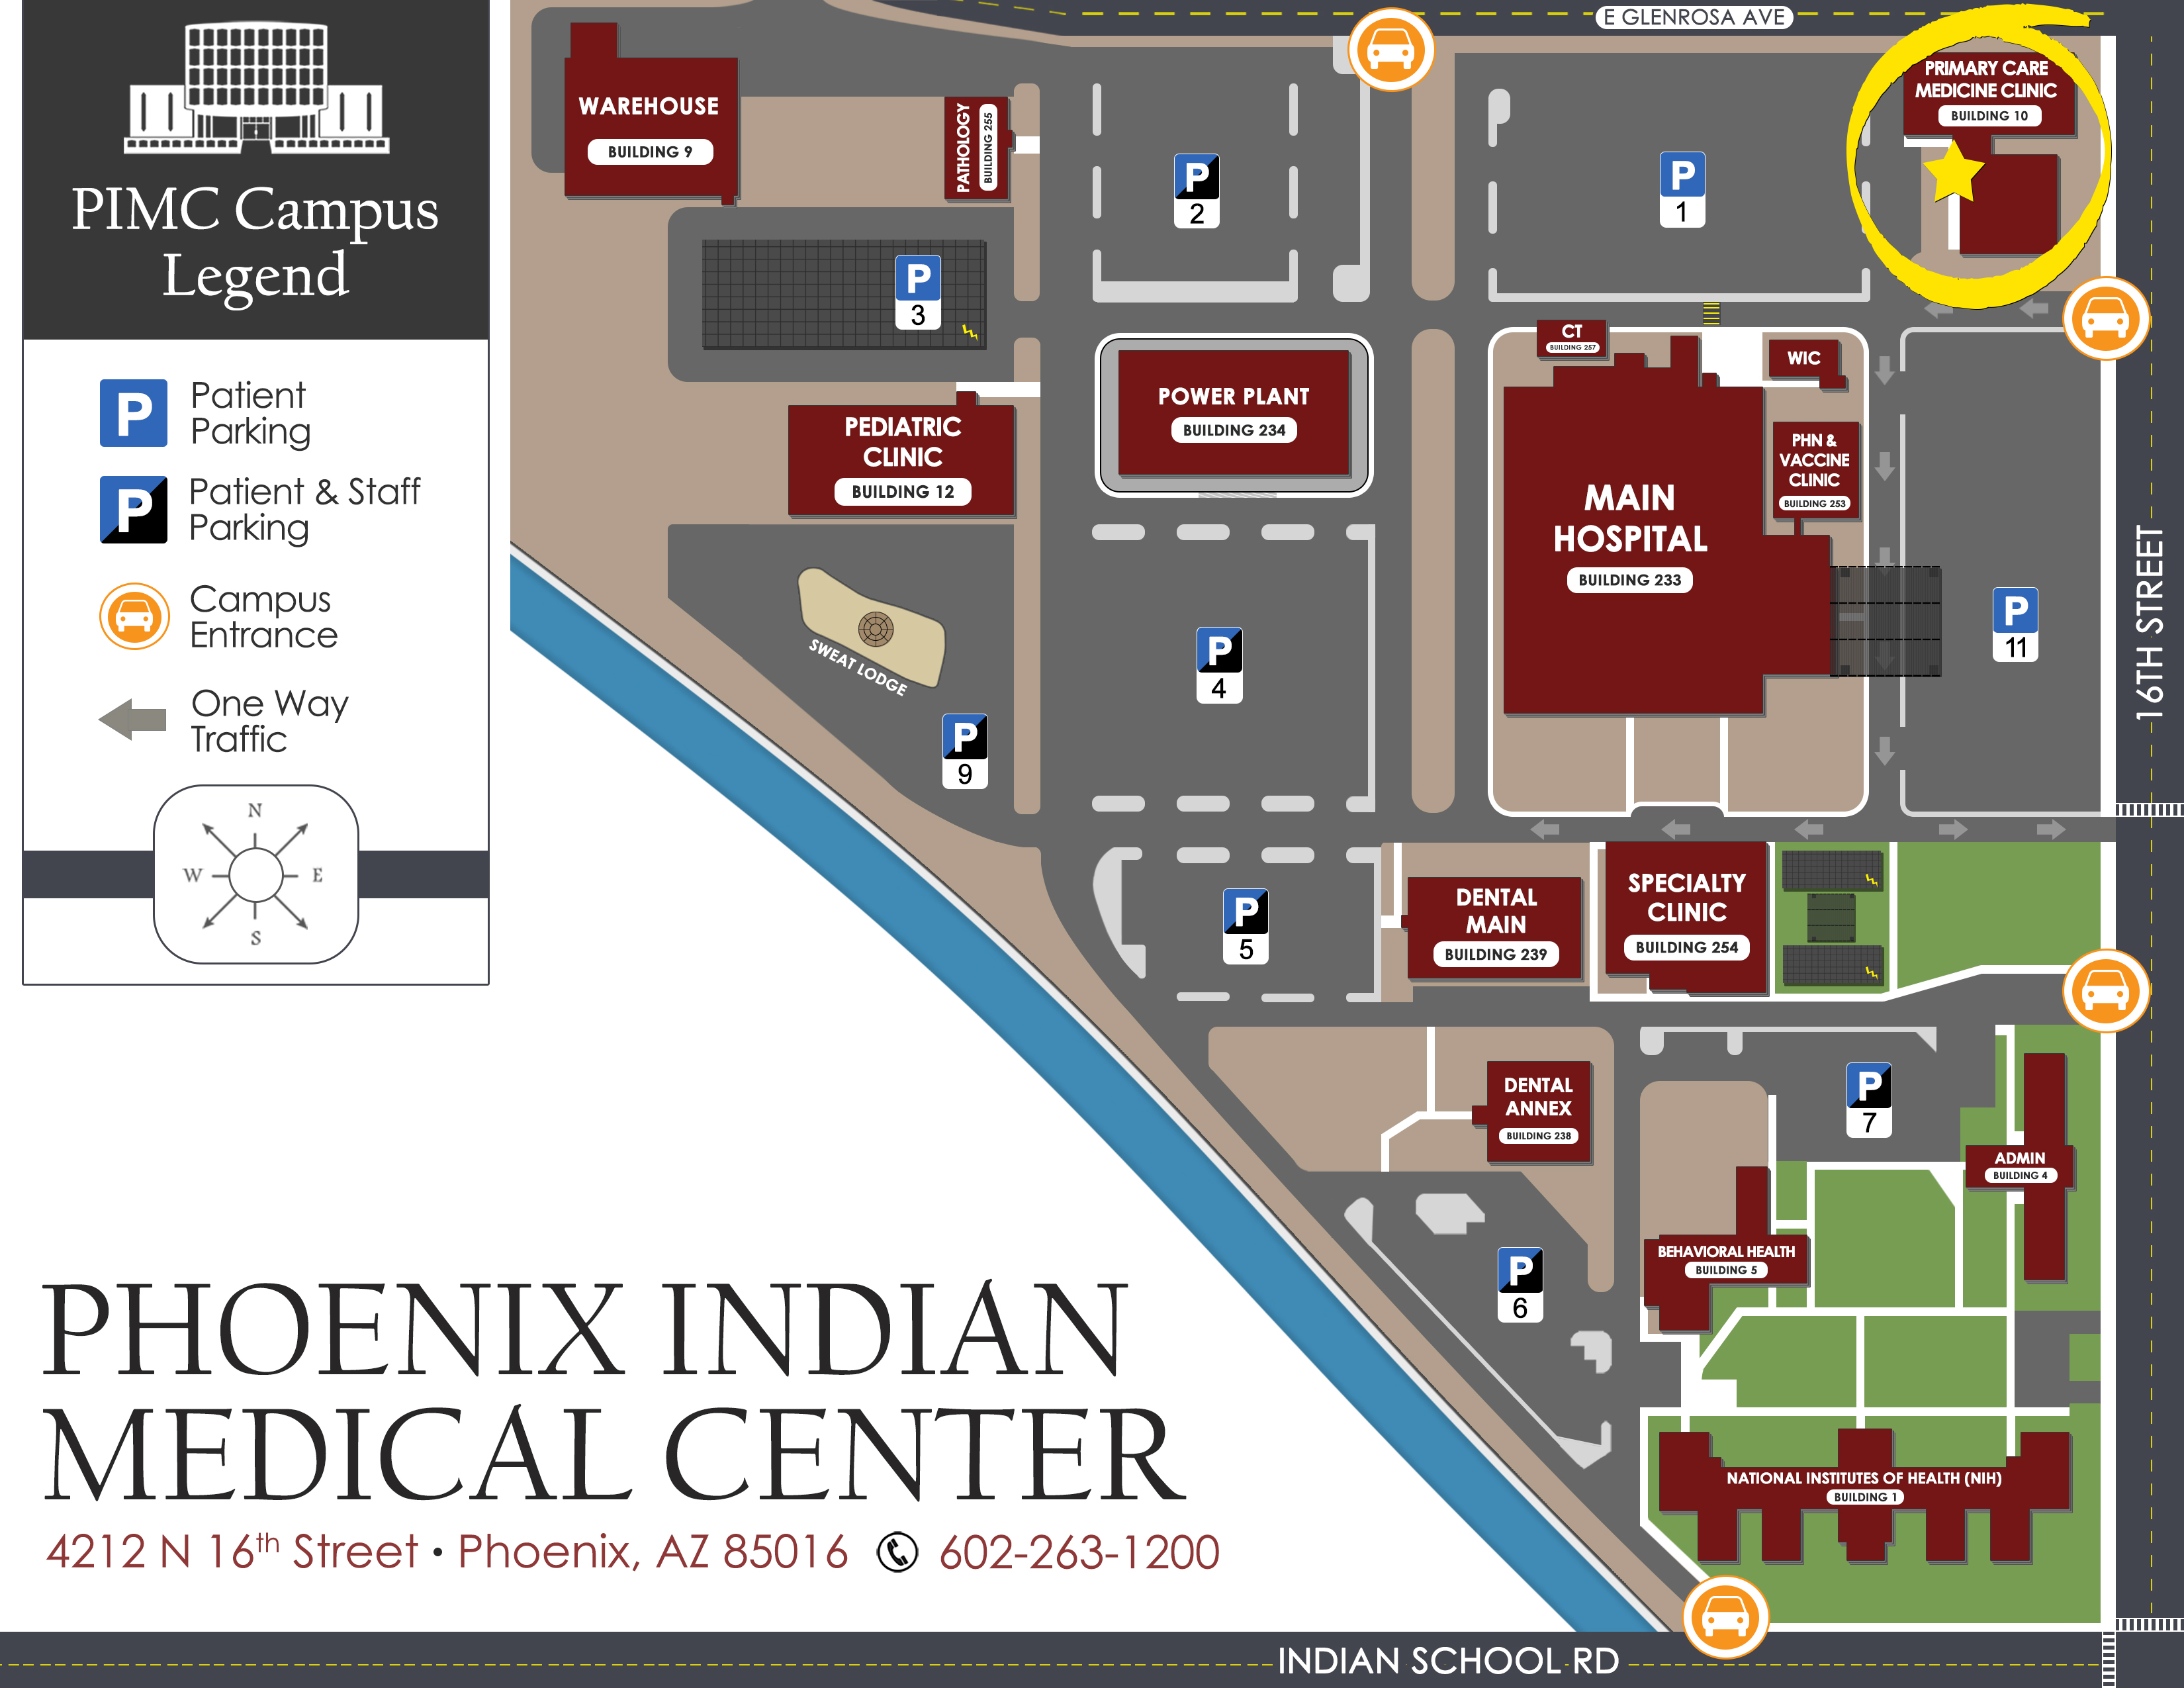 Primary Care Medical Clinic (PCMC) | Phoenix Indian Medical Center (PIMC)